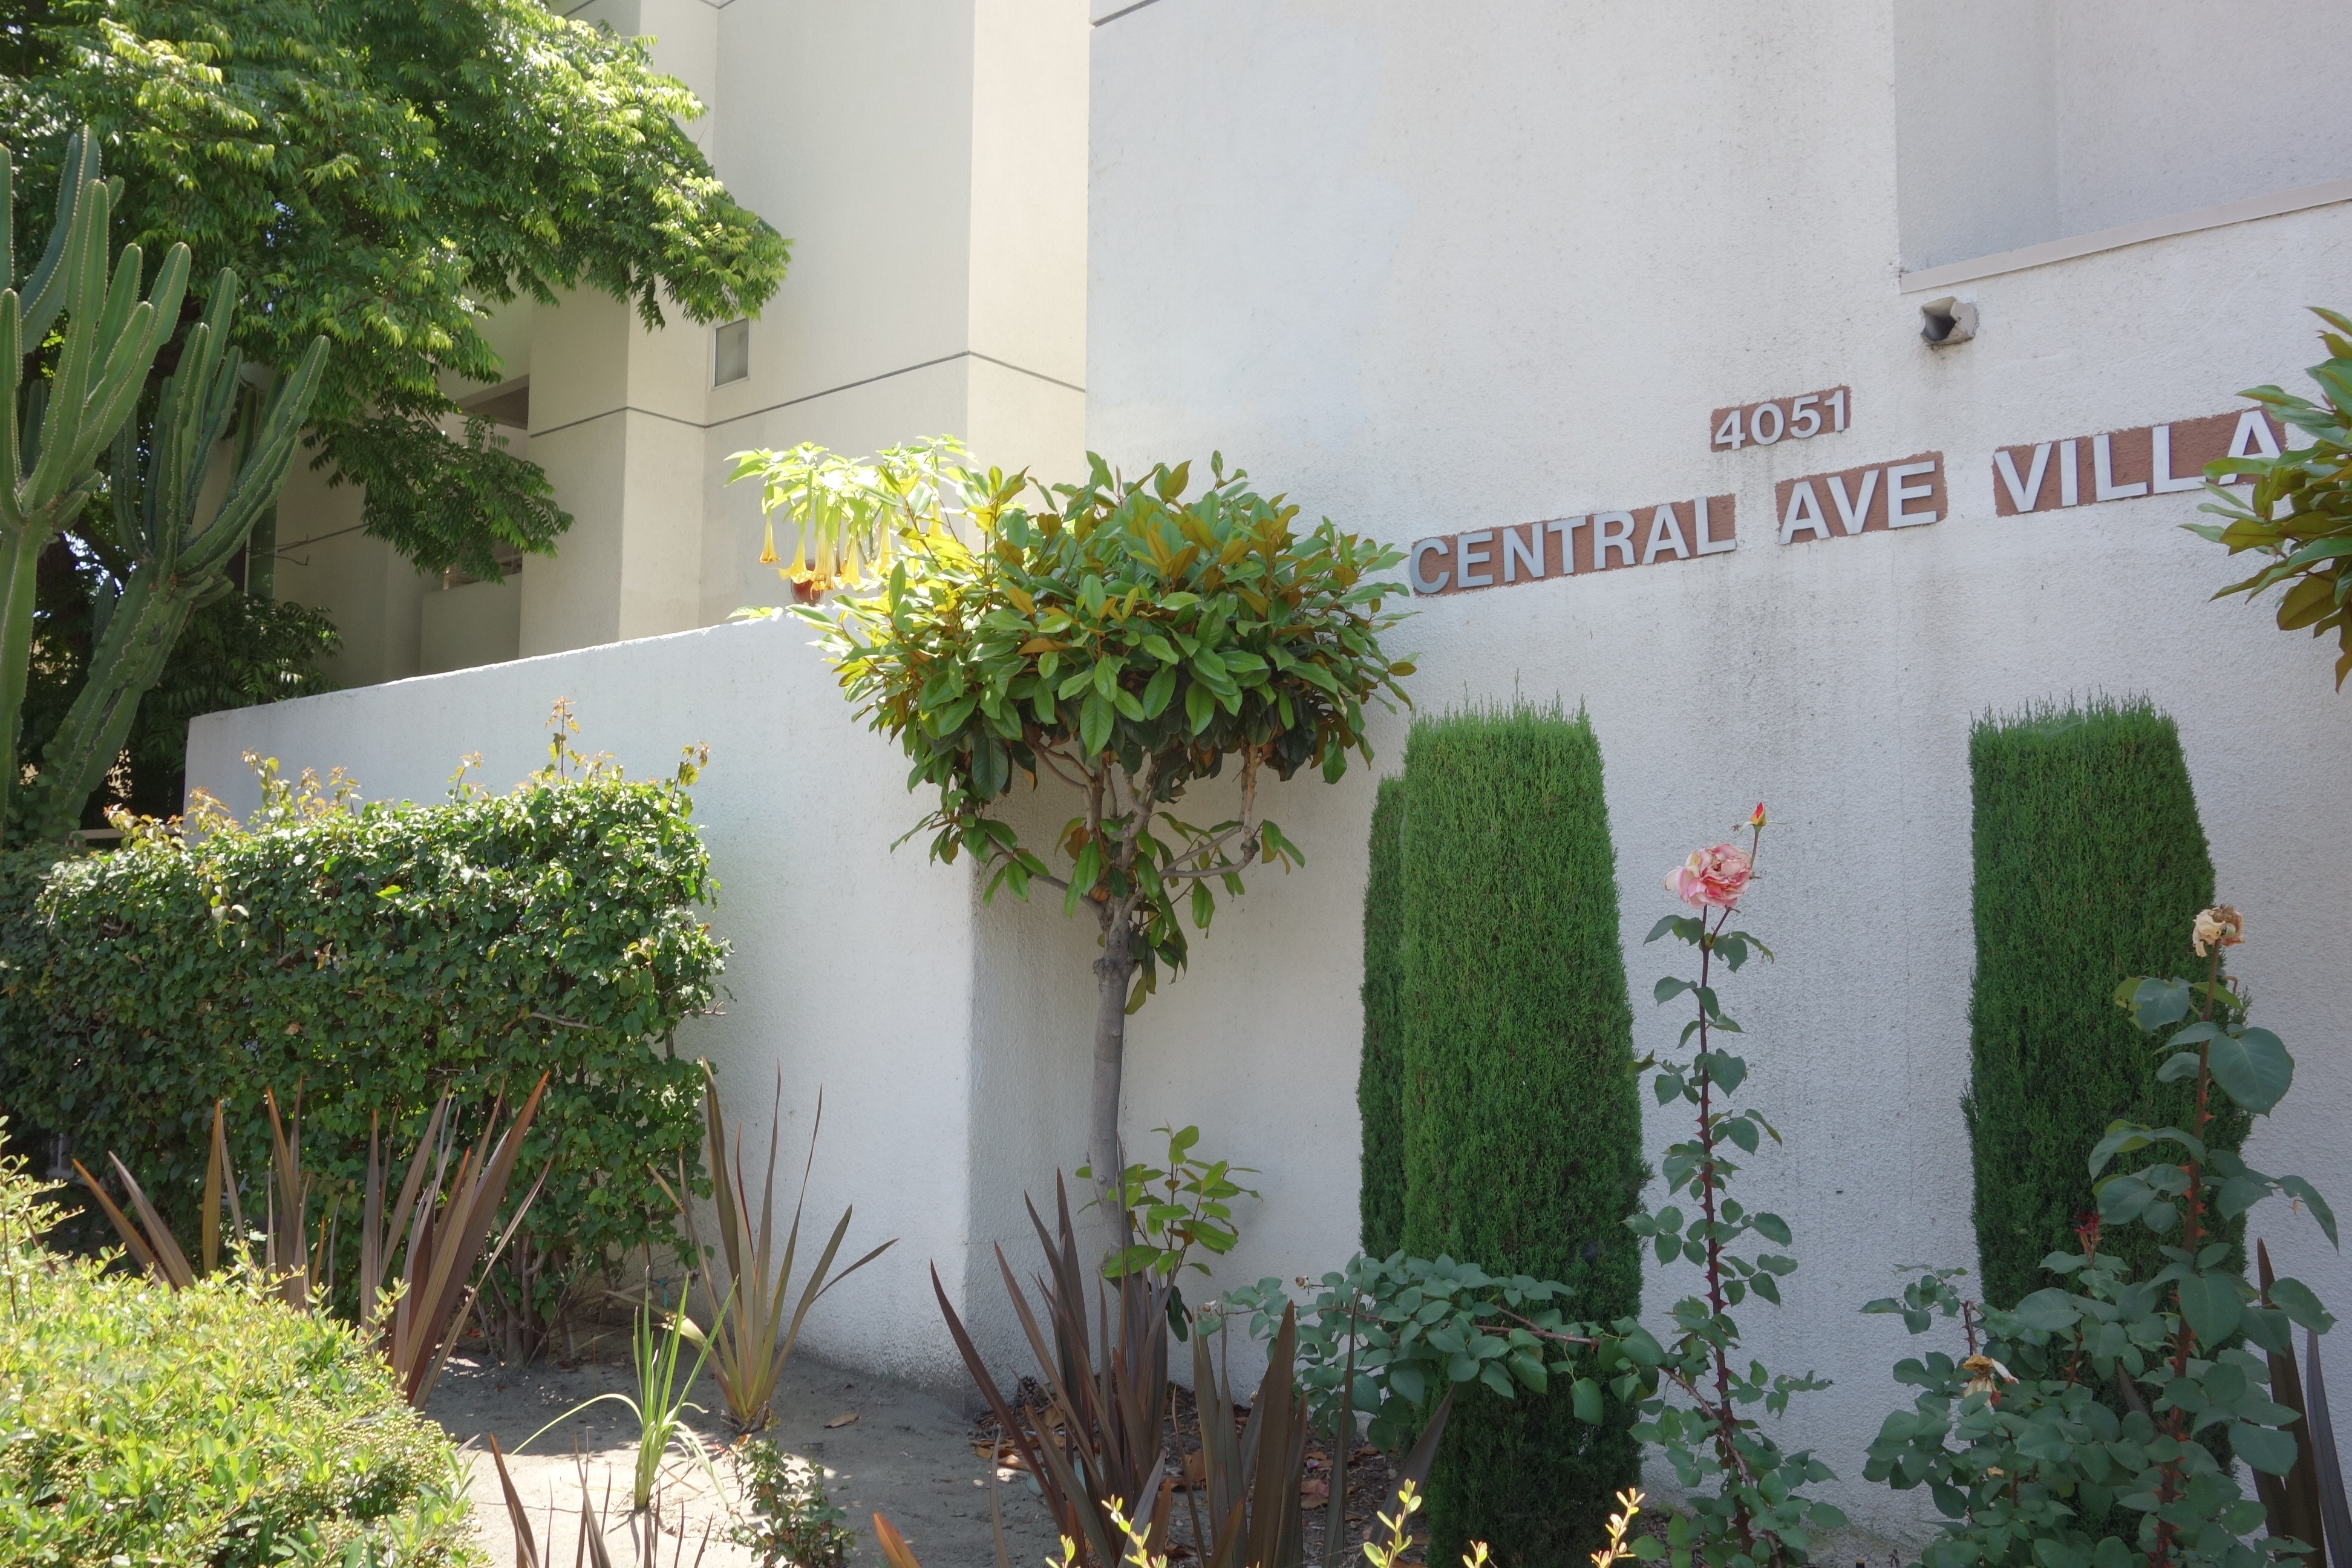 close view of central avenue villa sign. large garden area in front of sign .